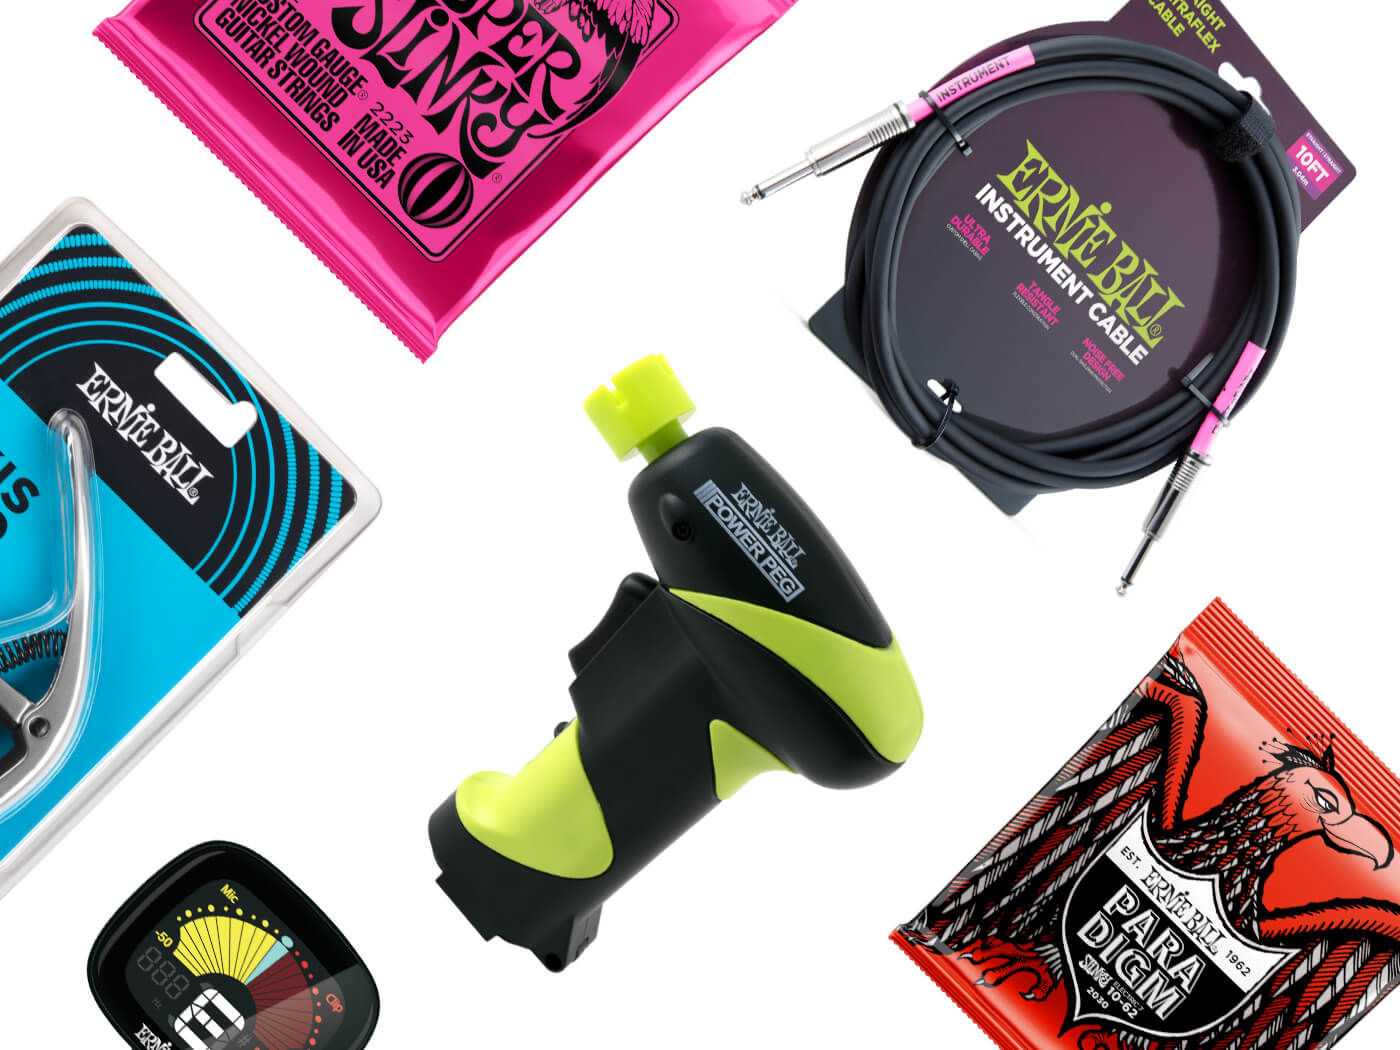 Ernie Ball Competition Prizes